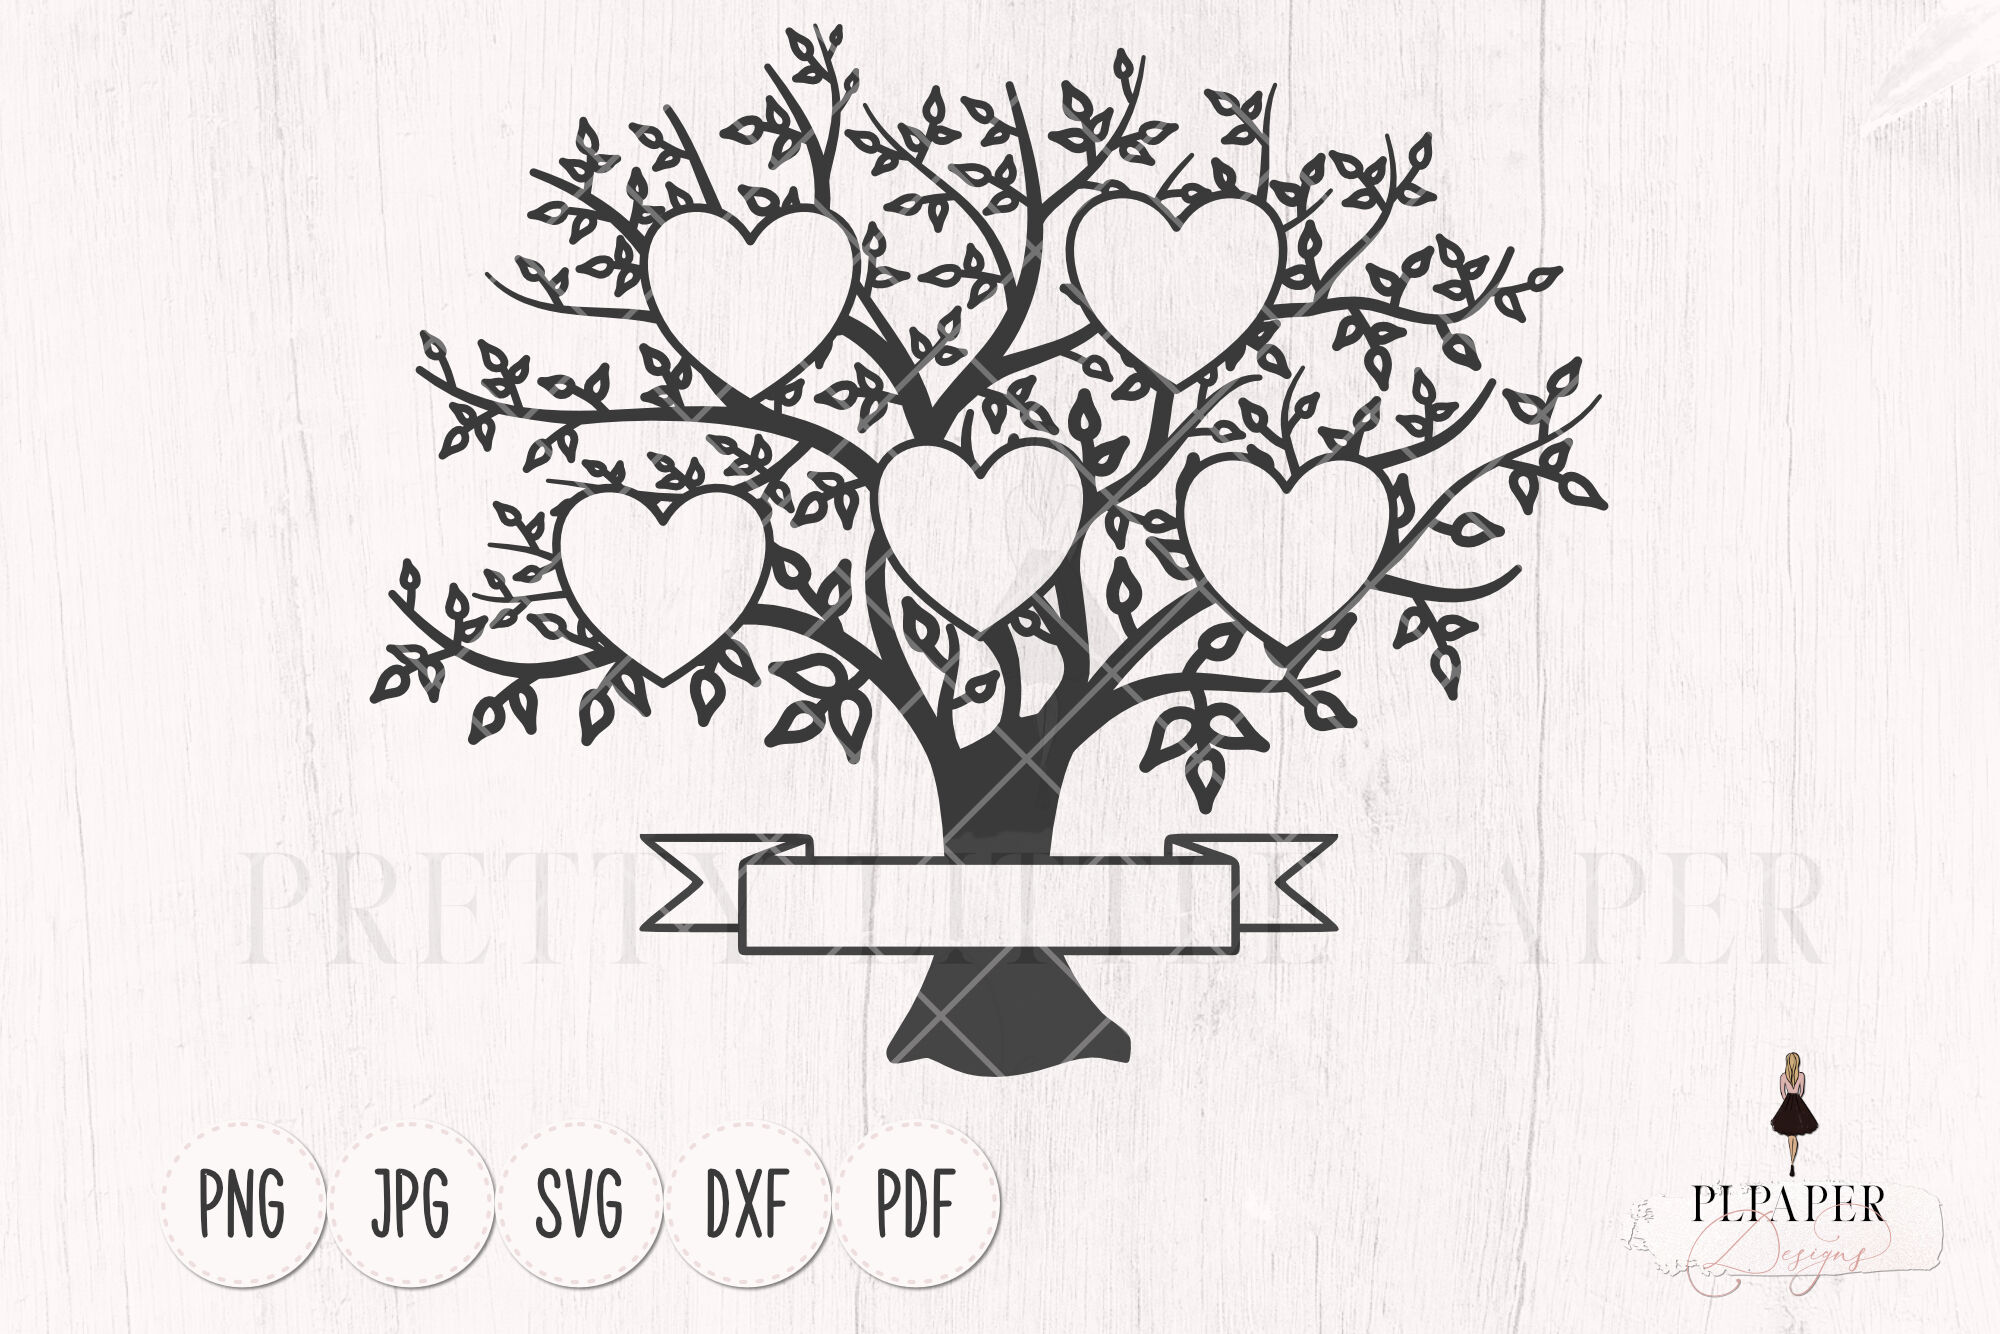 Family Tree SVG File for 5 names Family Tree 5 members Svg Family reunion svg file for Circut Family Tree Oval frame Svgpng.dxf file